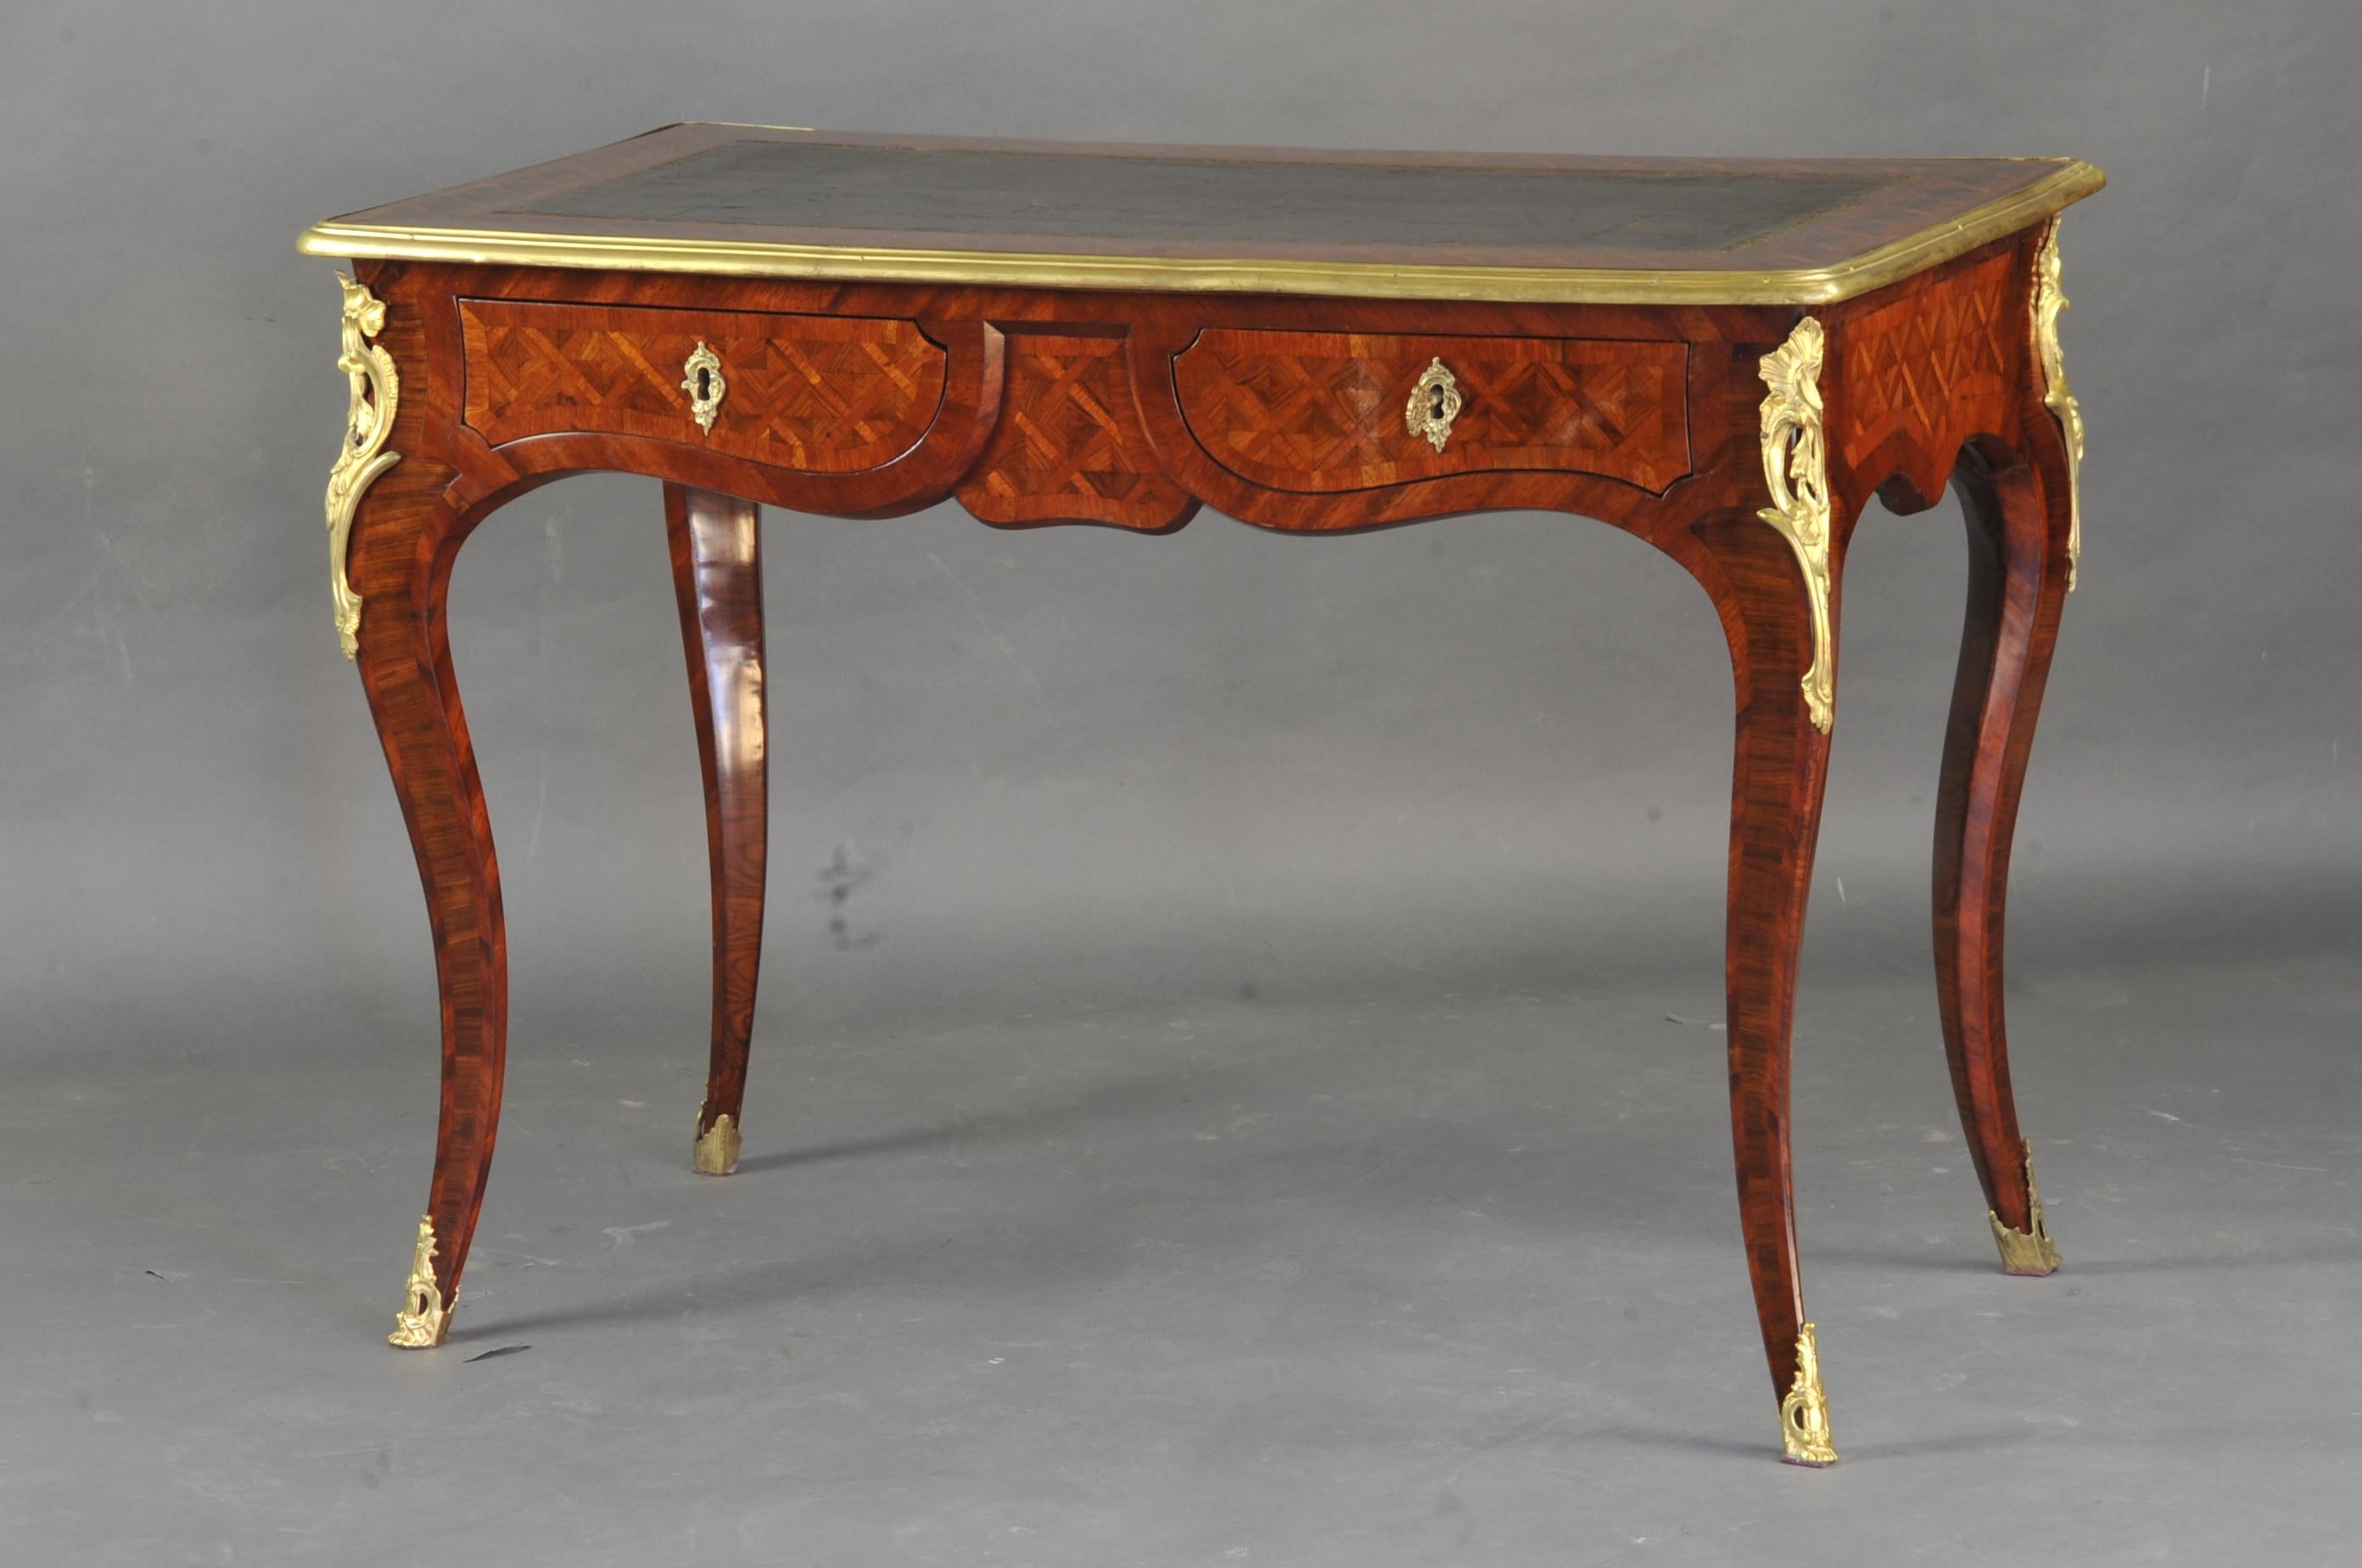 Lovely little center desk in violet wood marquetry decorated with braces, with beautiful finely chiseled gilt bronze ornamentation and an inlaid top adorned with fawn leather decorated with a golden frieze, all encircled in an ingot mold.

Opening